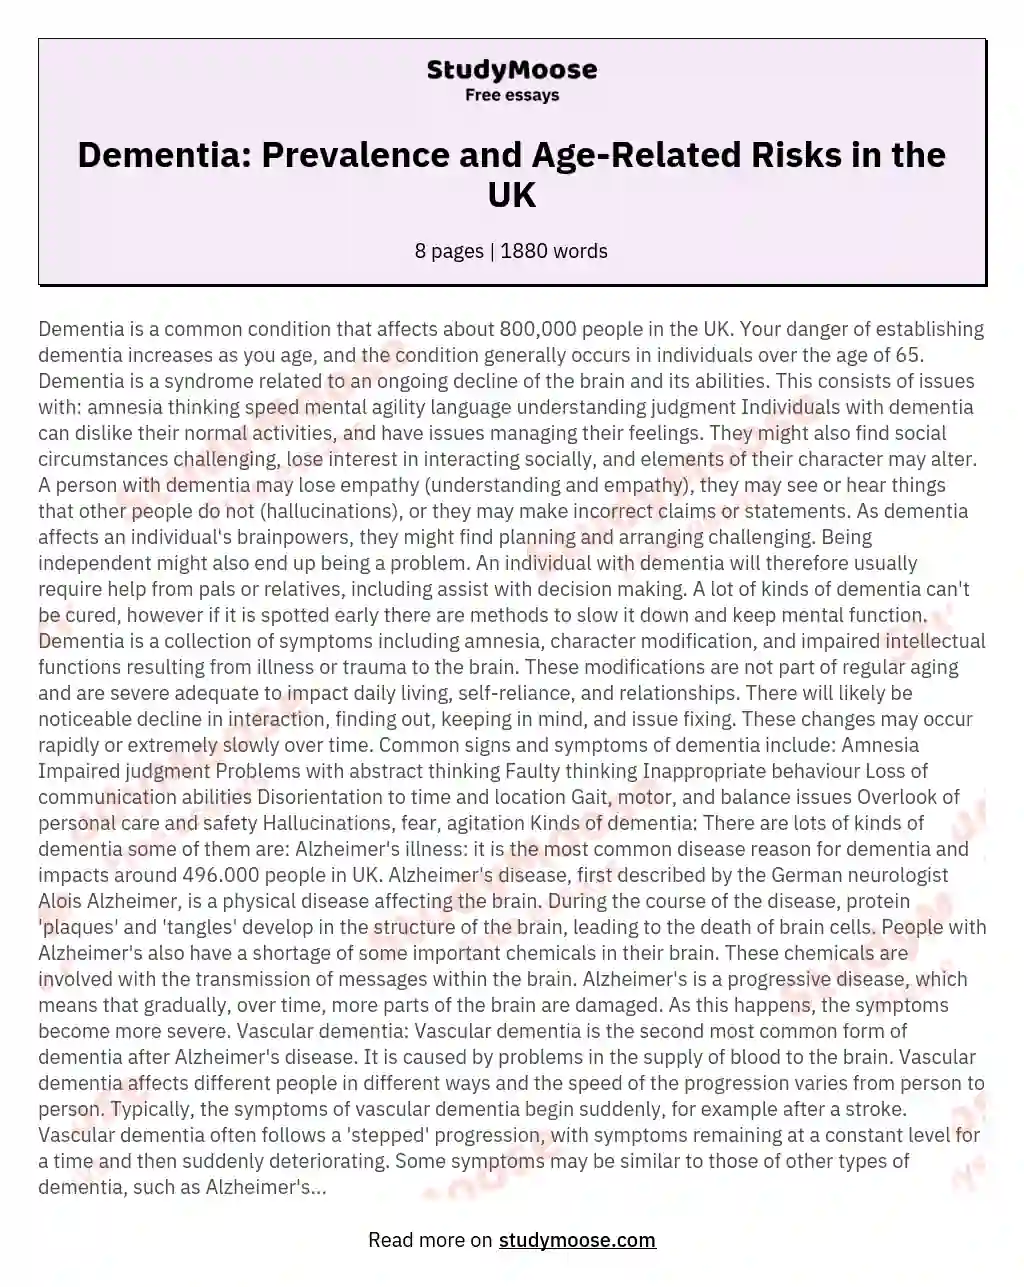 Dementia: Prevalence and Age-Related Risks in the UK essay